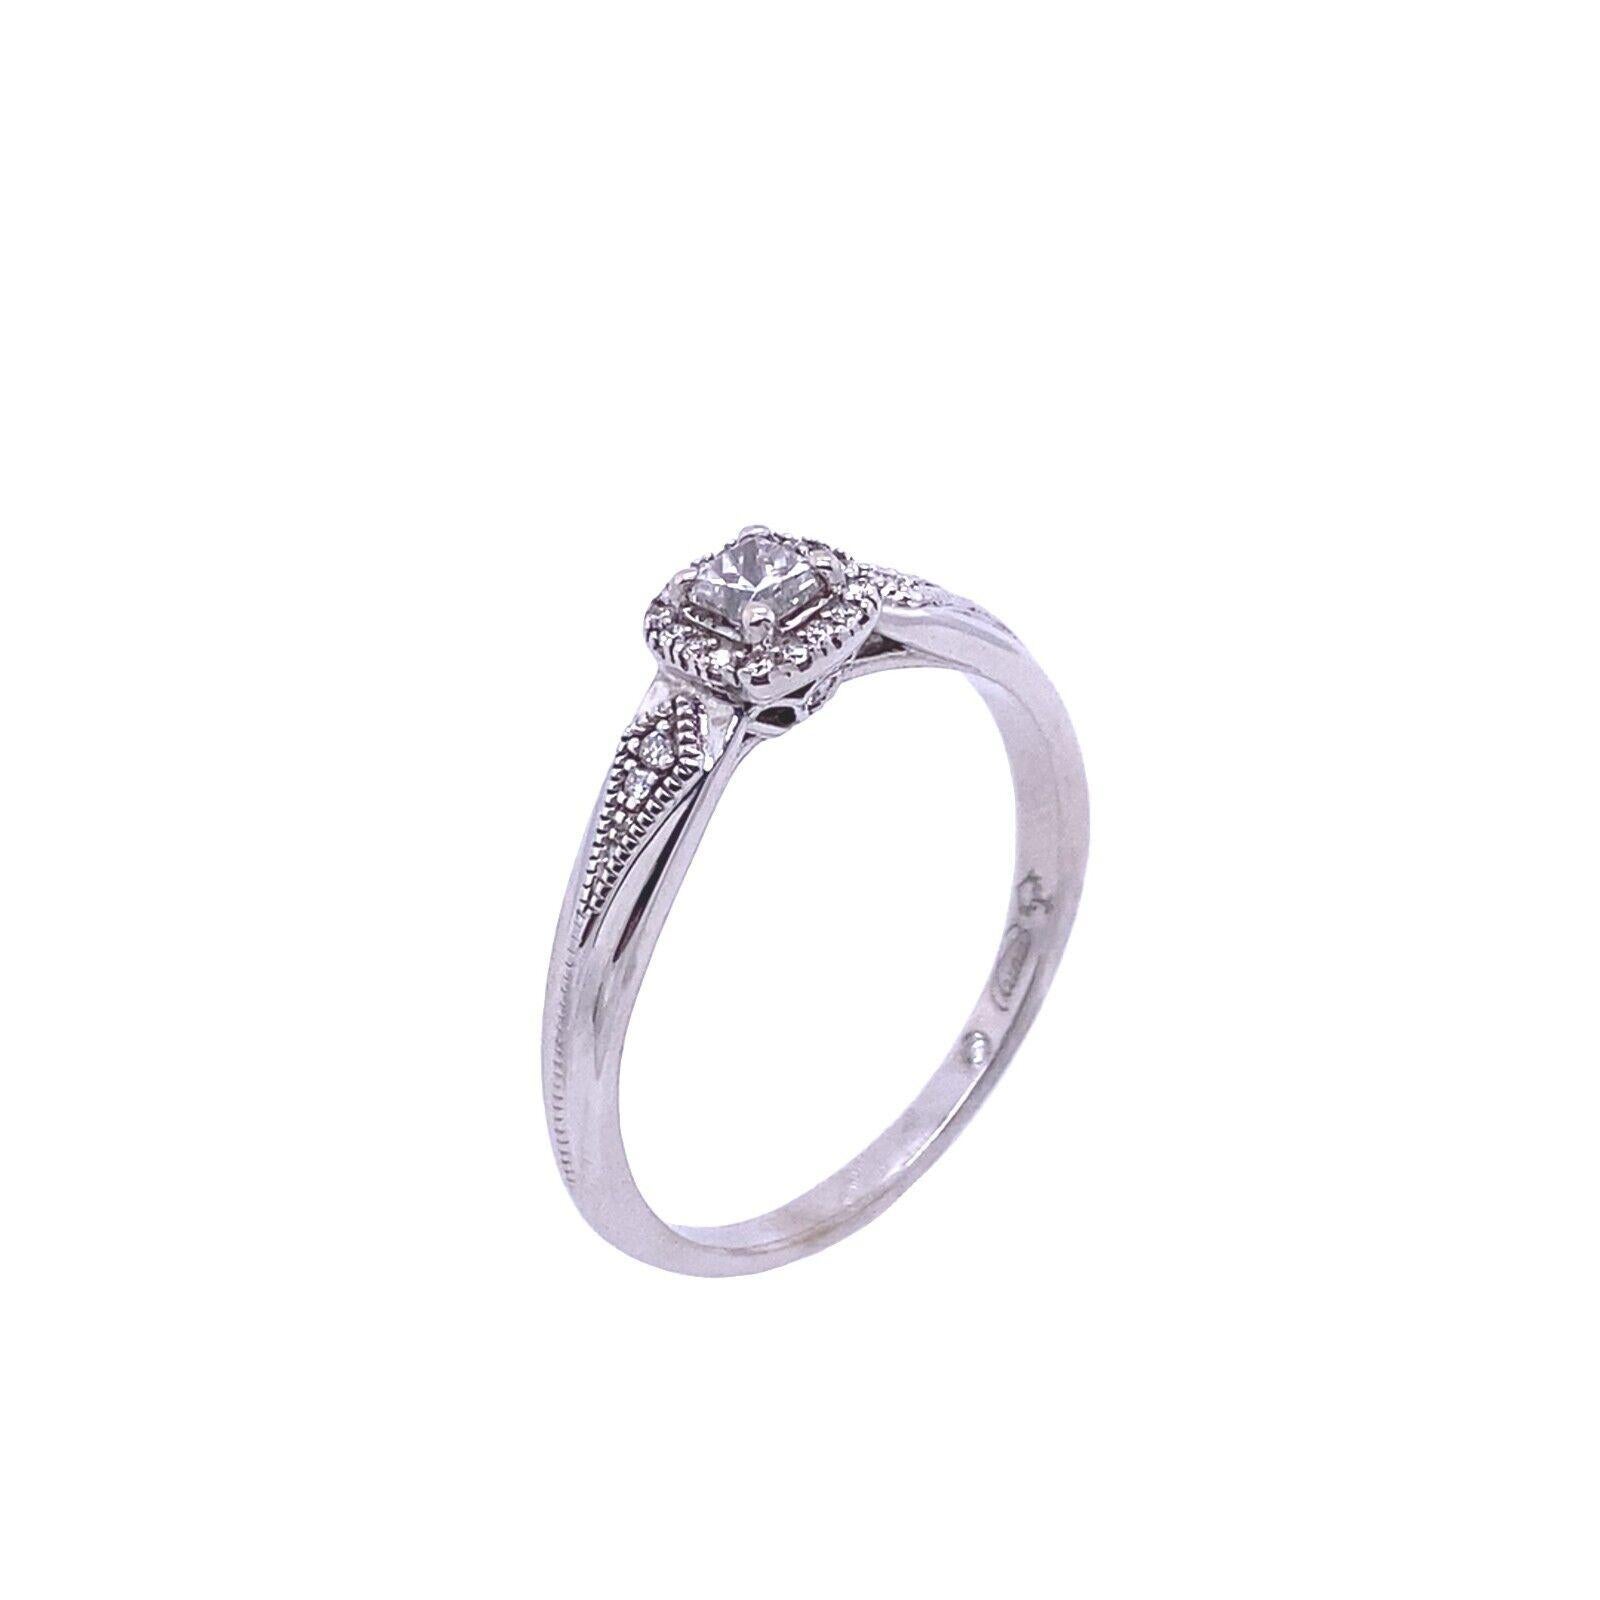 IGL Certified 0.18ct Diamond Ring in 9ct White Gold

This beautiful diamond ring is made from 9ct white gold, set with an IGL certified 0.18ct princess cut diamond with 0.07ct of small diamonds on sides and is supplied with a certificate for IGL